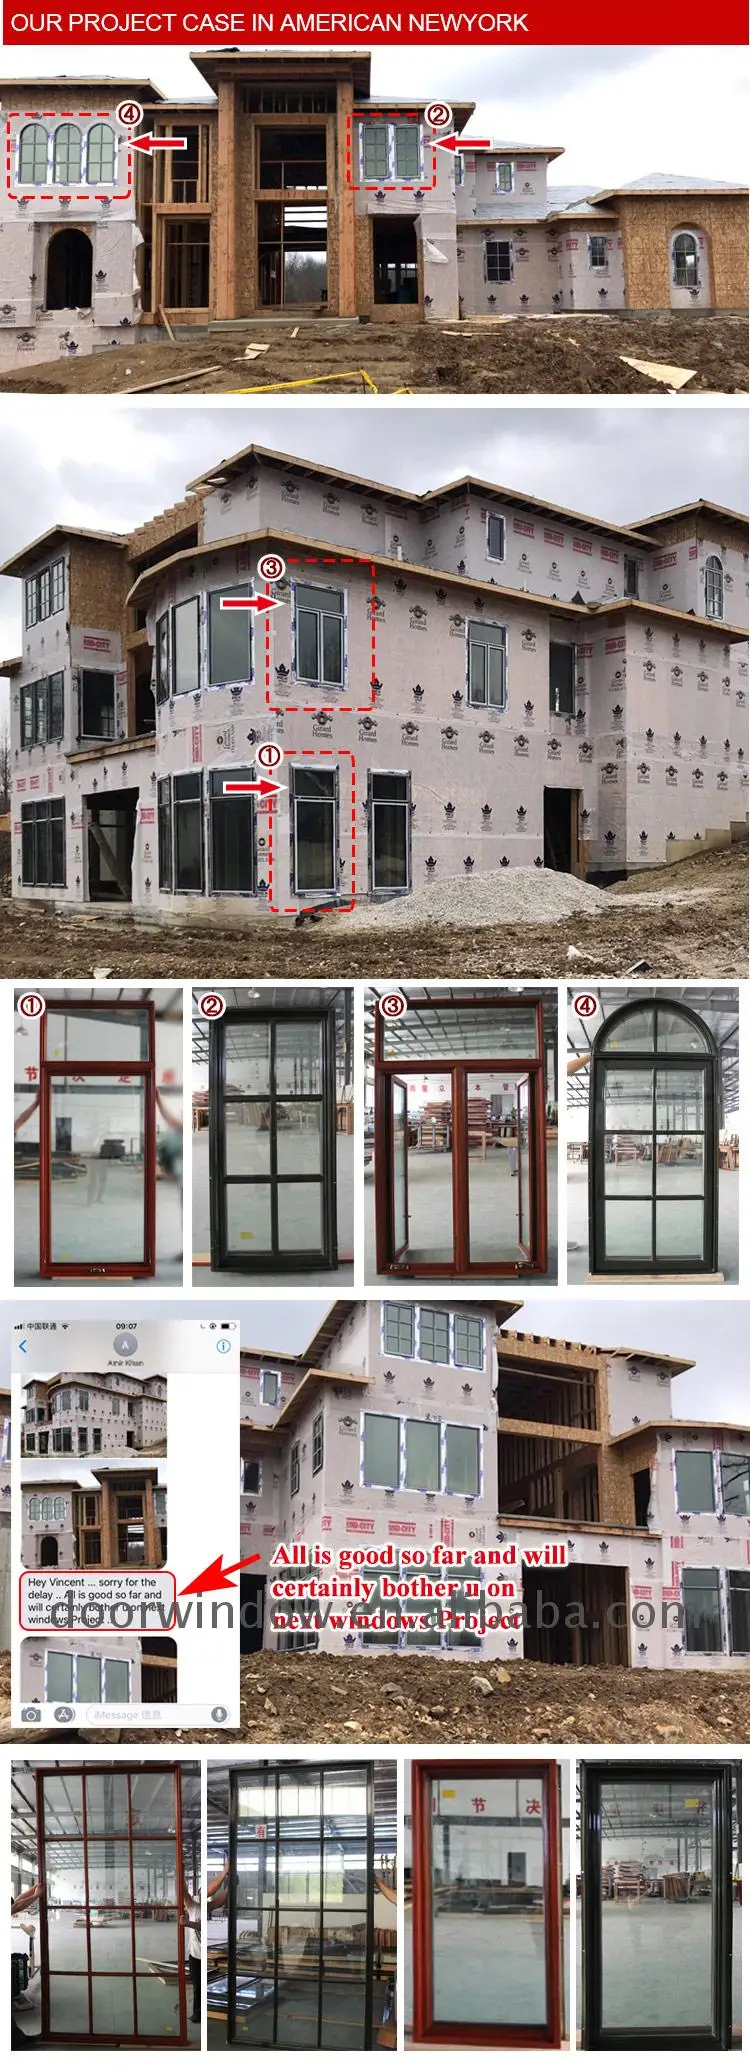 Factory Direct High Quality crank window out windows